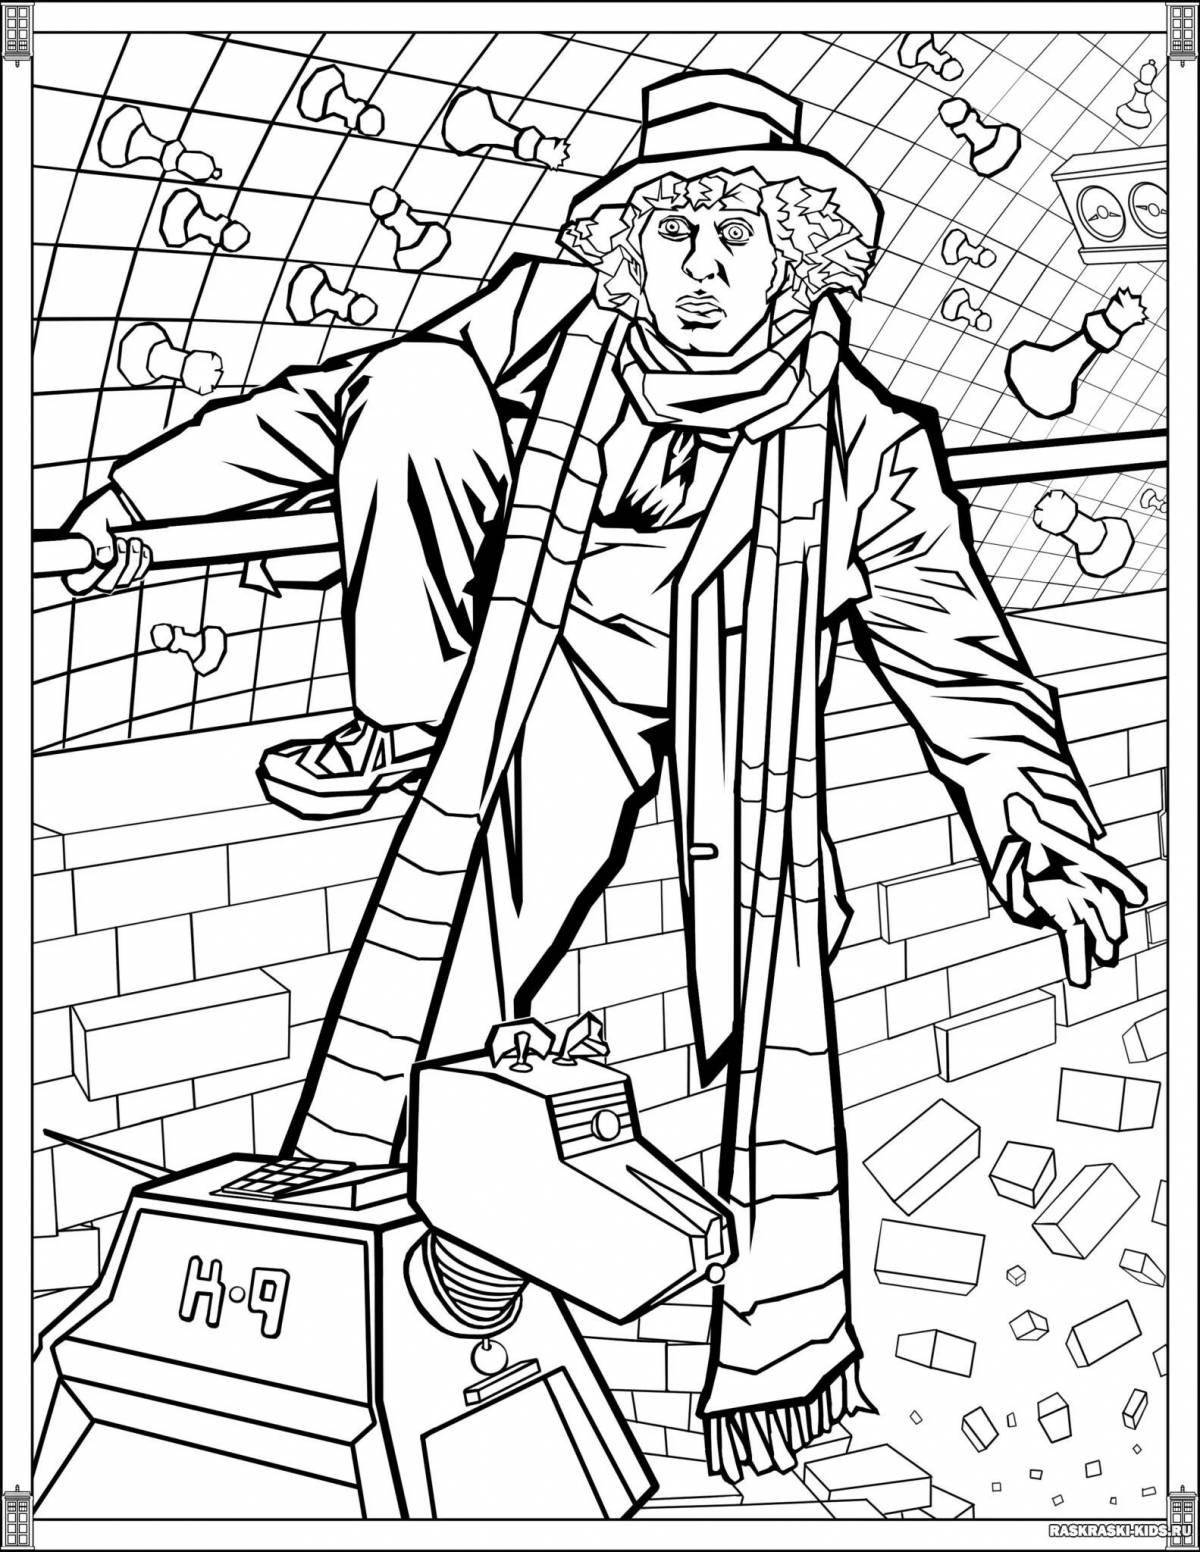 Charming doctor coloring book